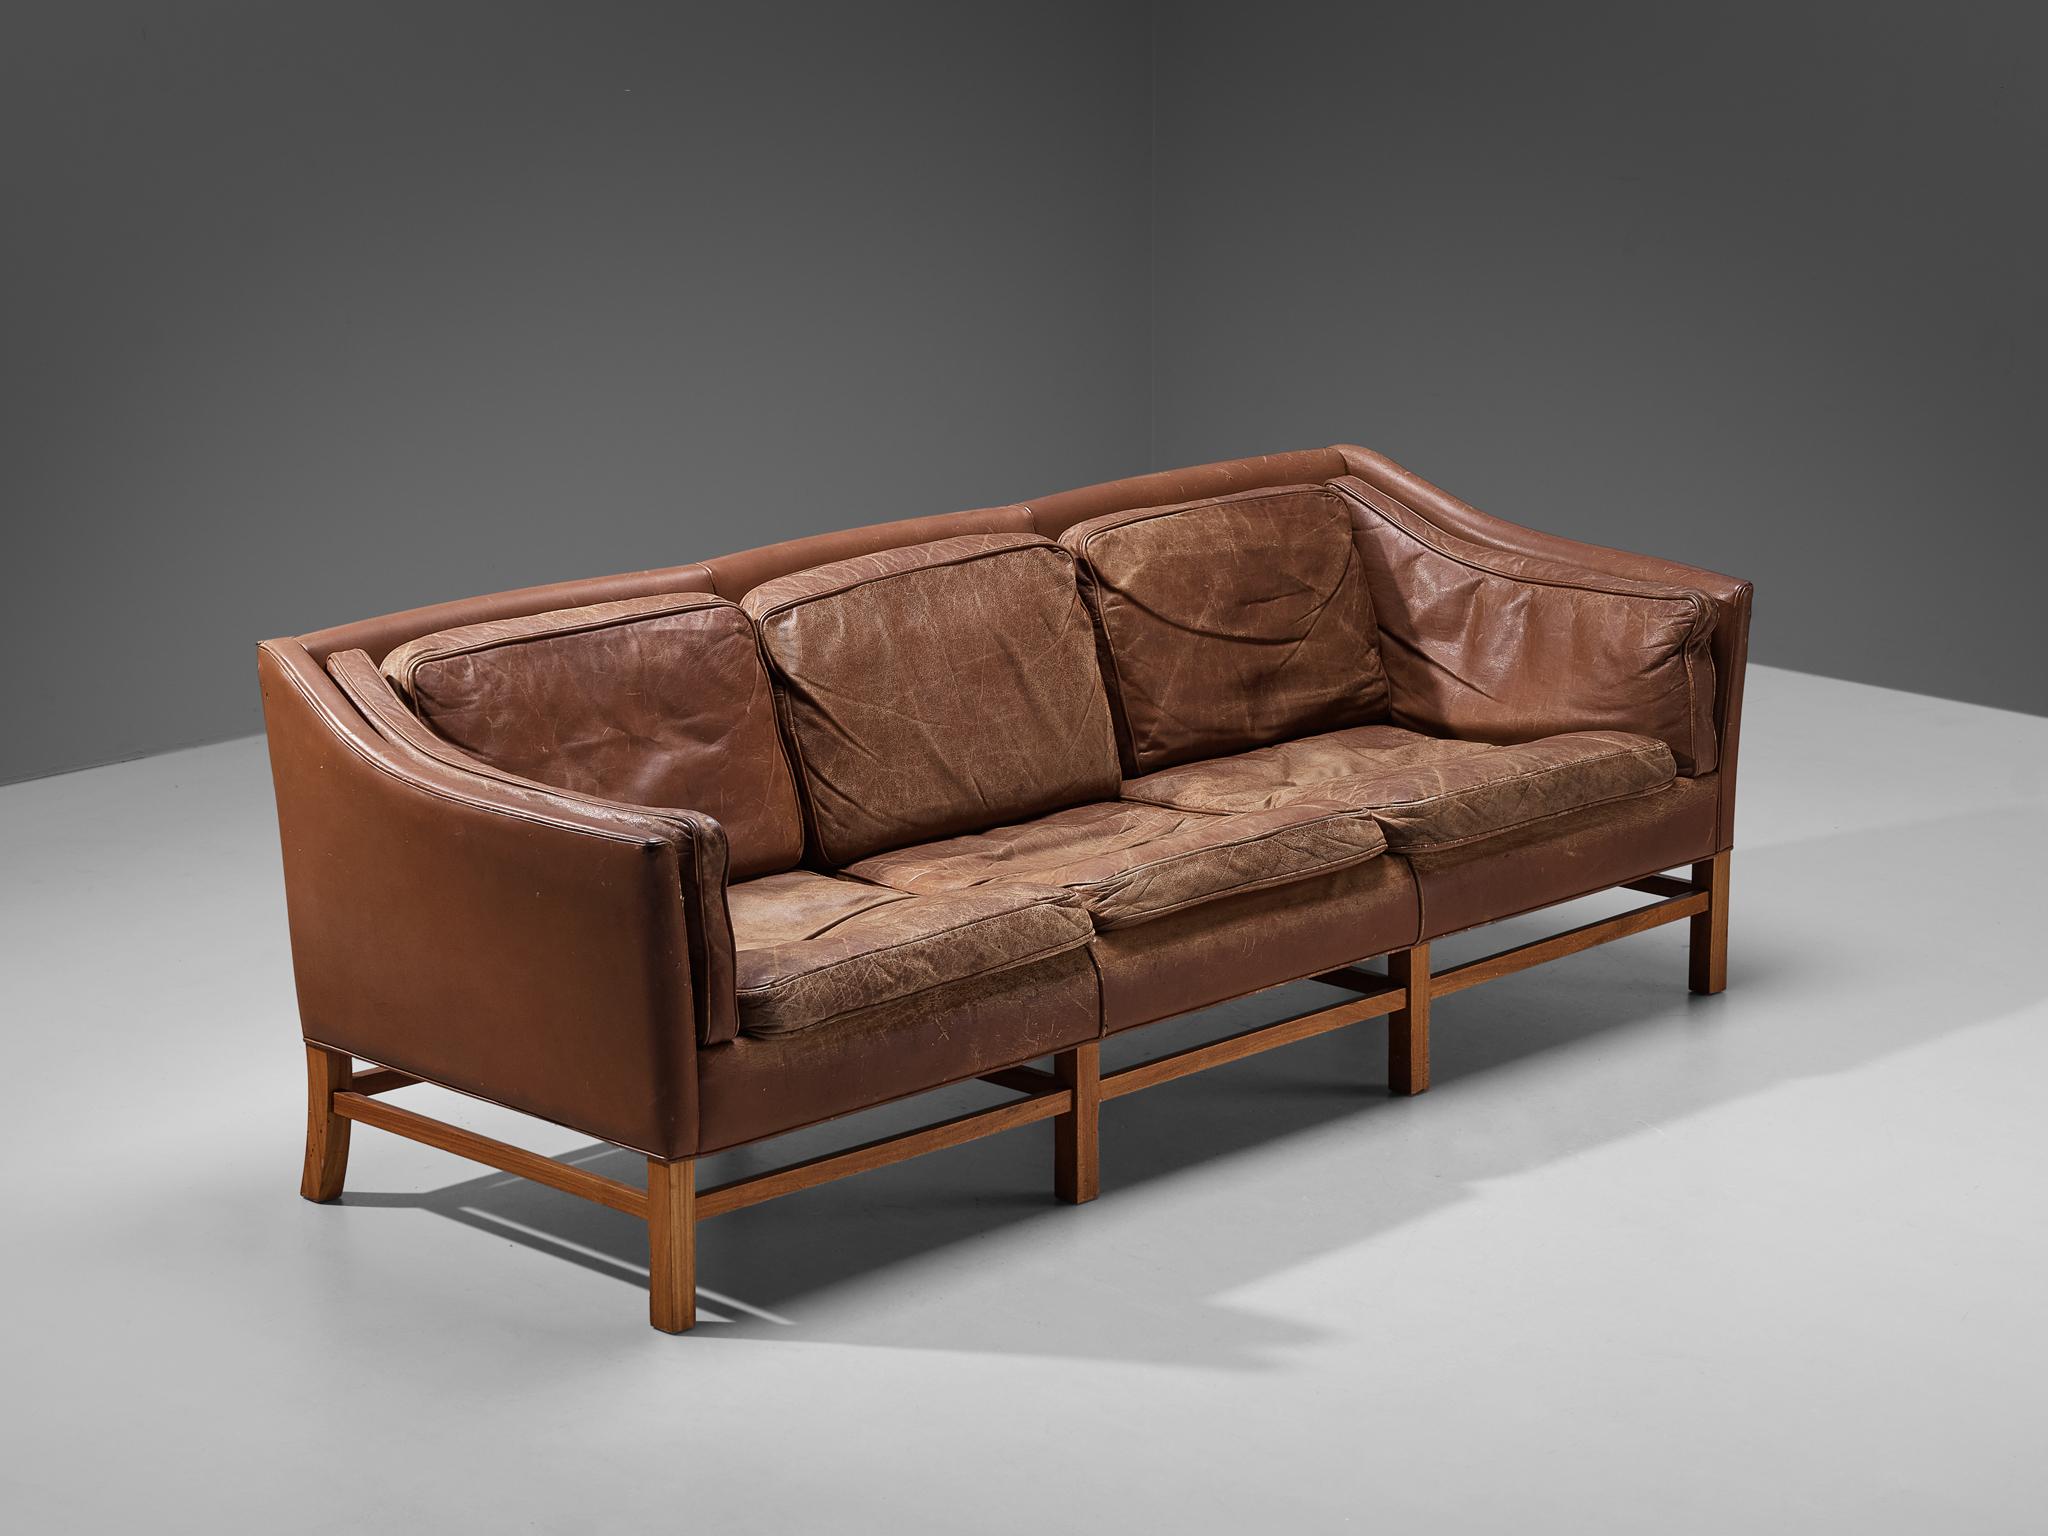 Sofa, leather, stained mahogany, Denmark, 1960s

This classic sofa of Danish origin features modest and subtle lines and shapes that emphasize the clear construction of the design. The sofa rests on a well-proportioned base that lifts the sofa up